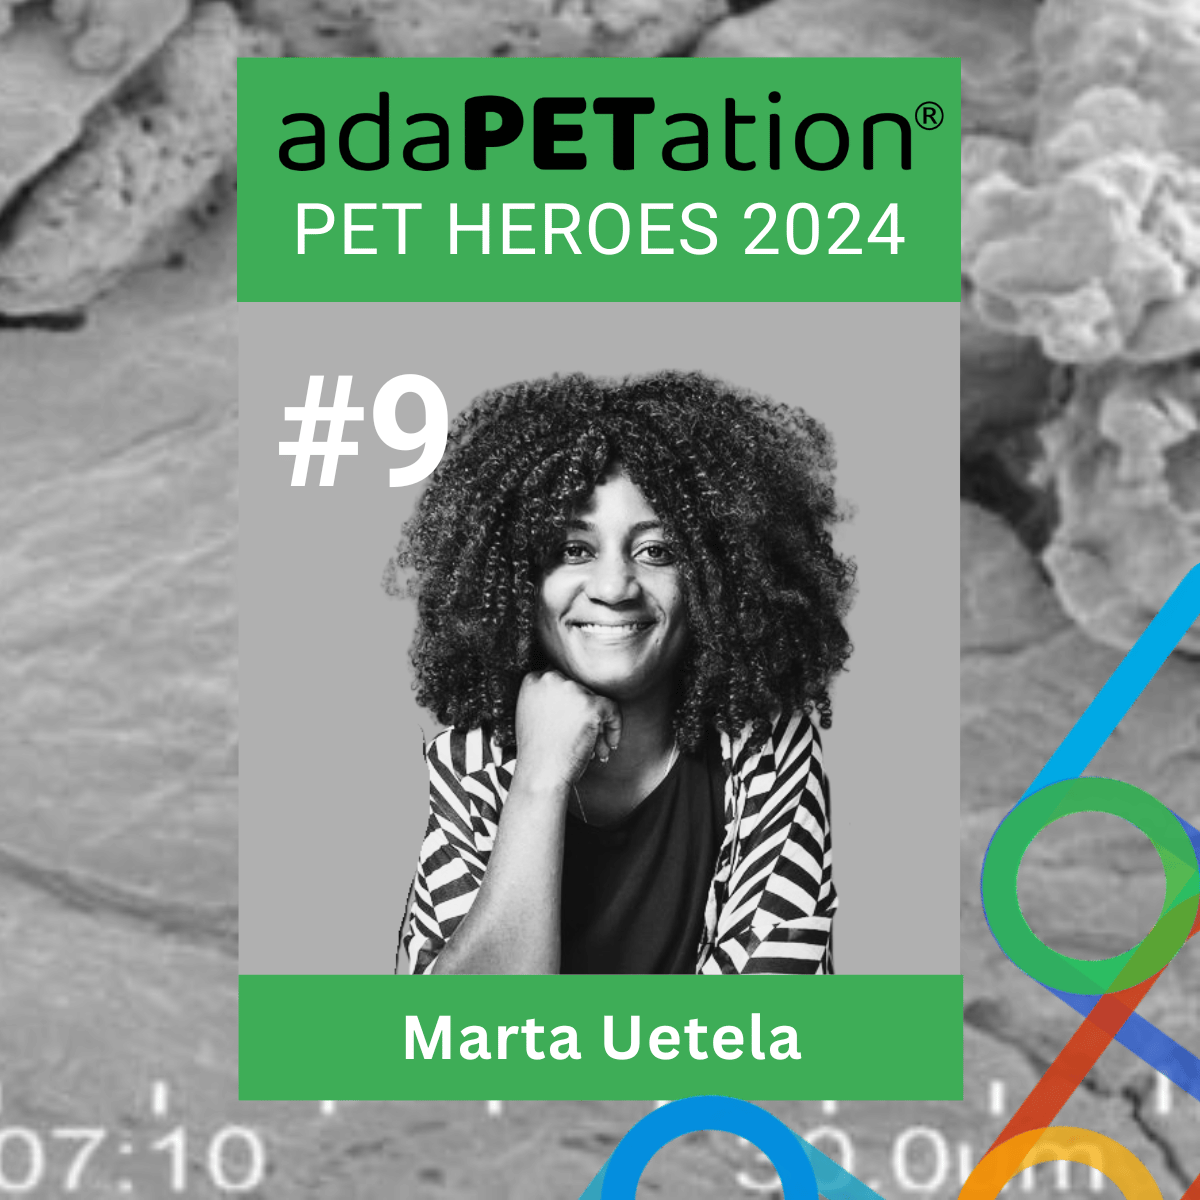 Our ninth nominee is Marta Uetela co-founder of Biomec